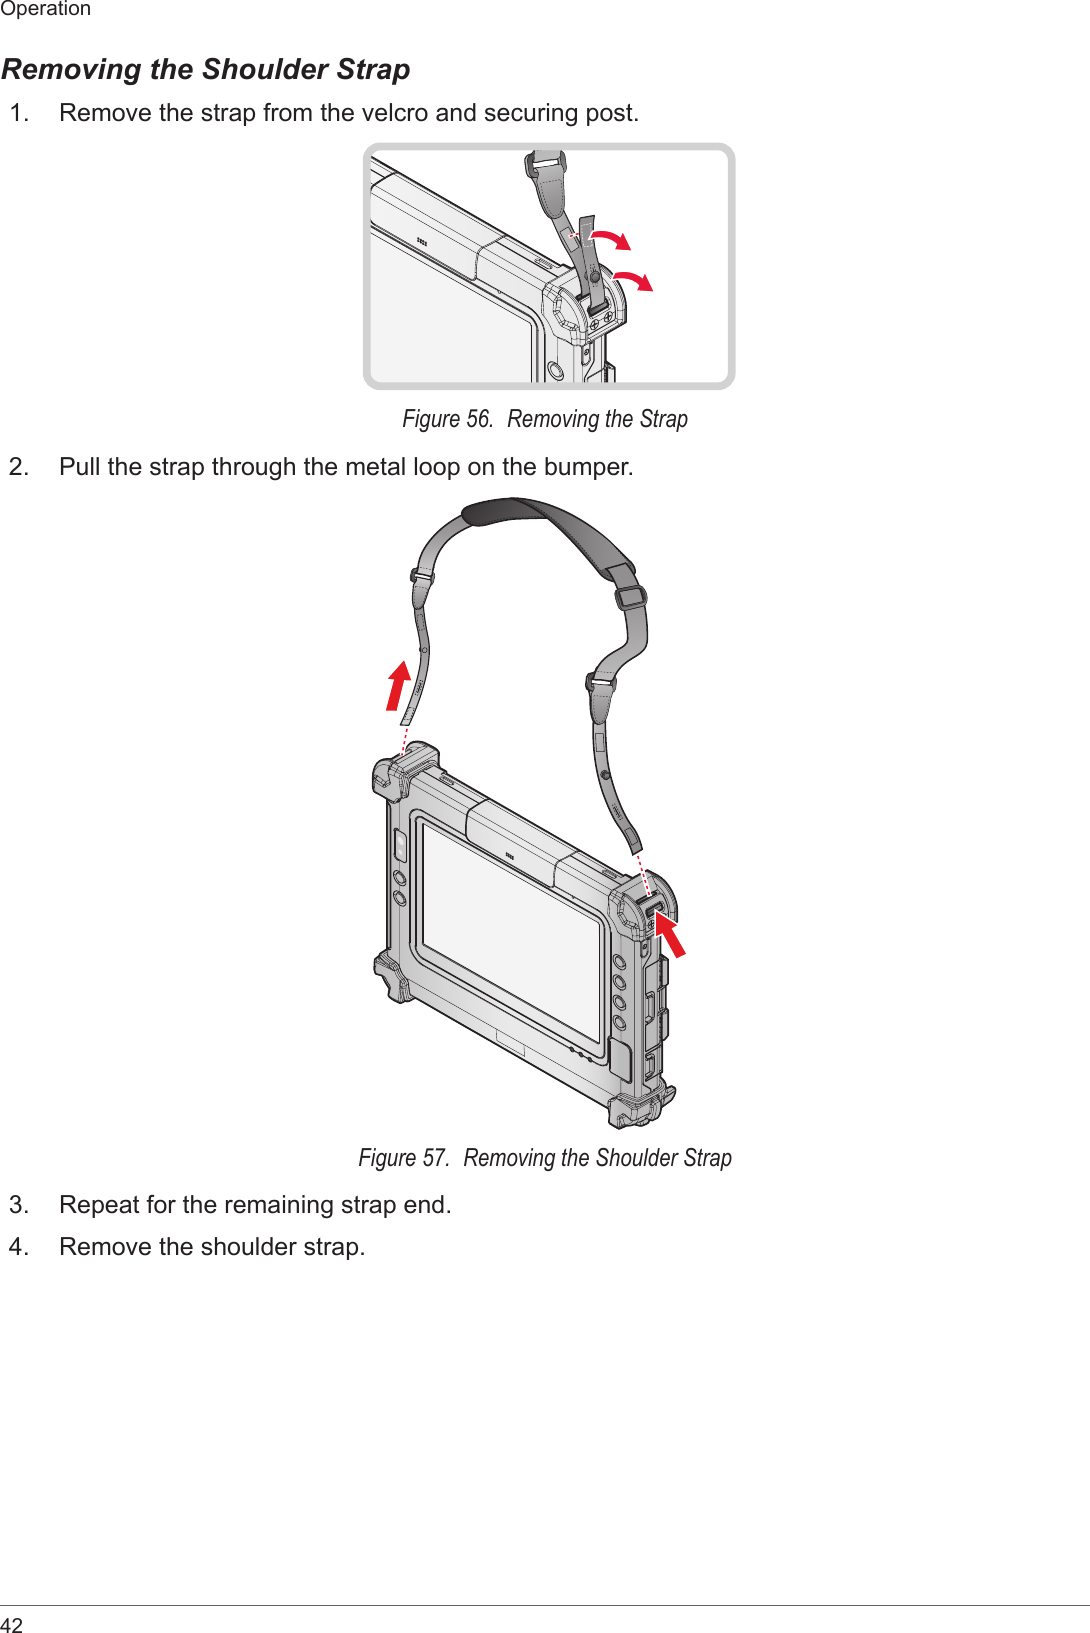 42OperationRemoving the Shoulder Strap1.  Remove the strap from the velcro and securing post.Figure 56.  Removing the Strap2.  Pull the strap through the metal loop on the bumper.Figure 57.  Removing the Shoulder Strap3.  Repeat for the remaining strap end.4.  Remove the shoulder strap.